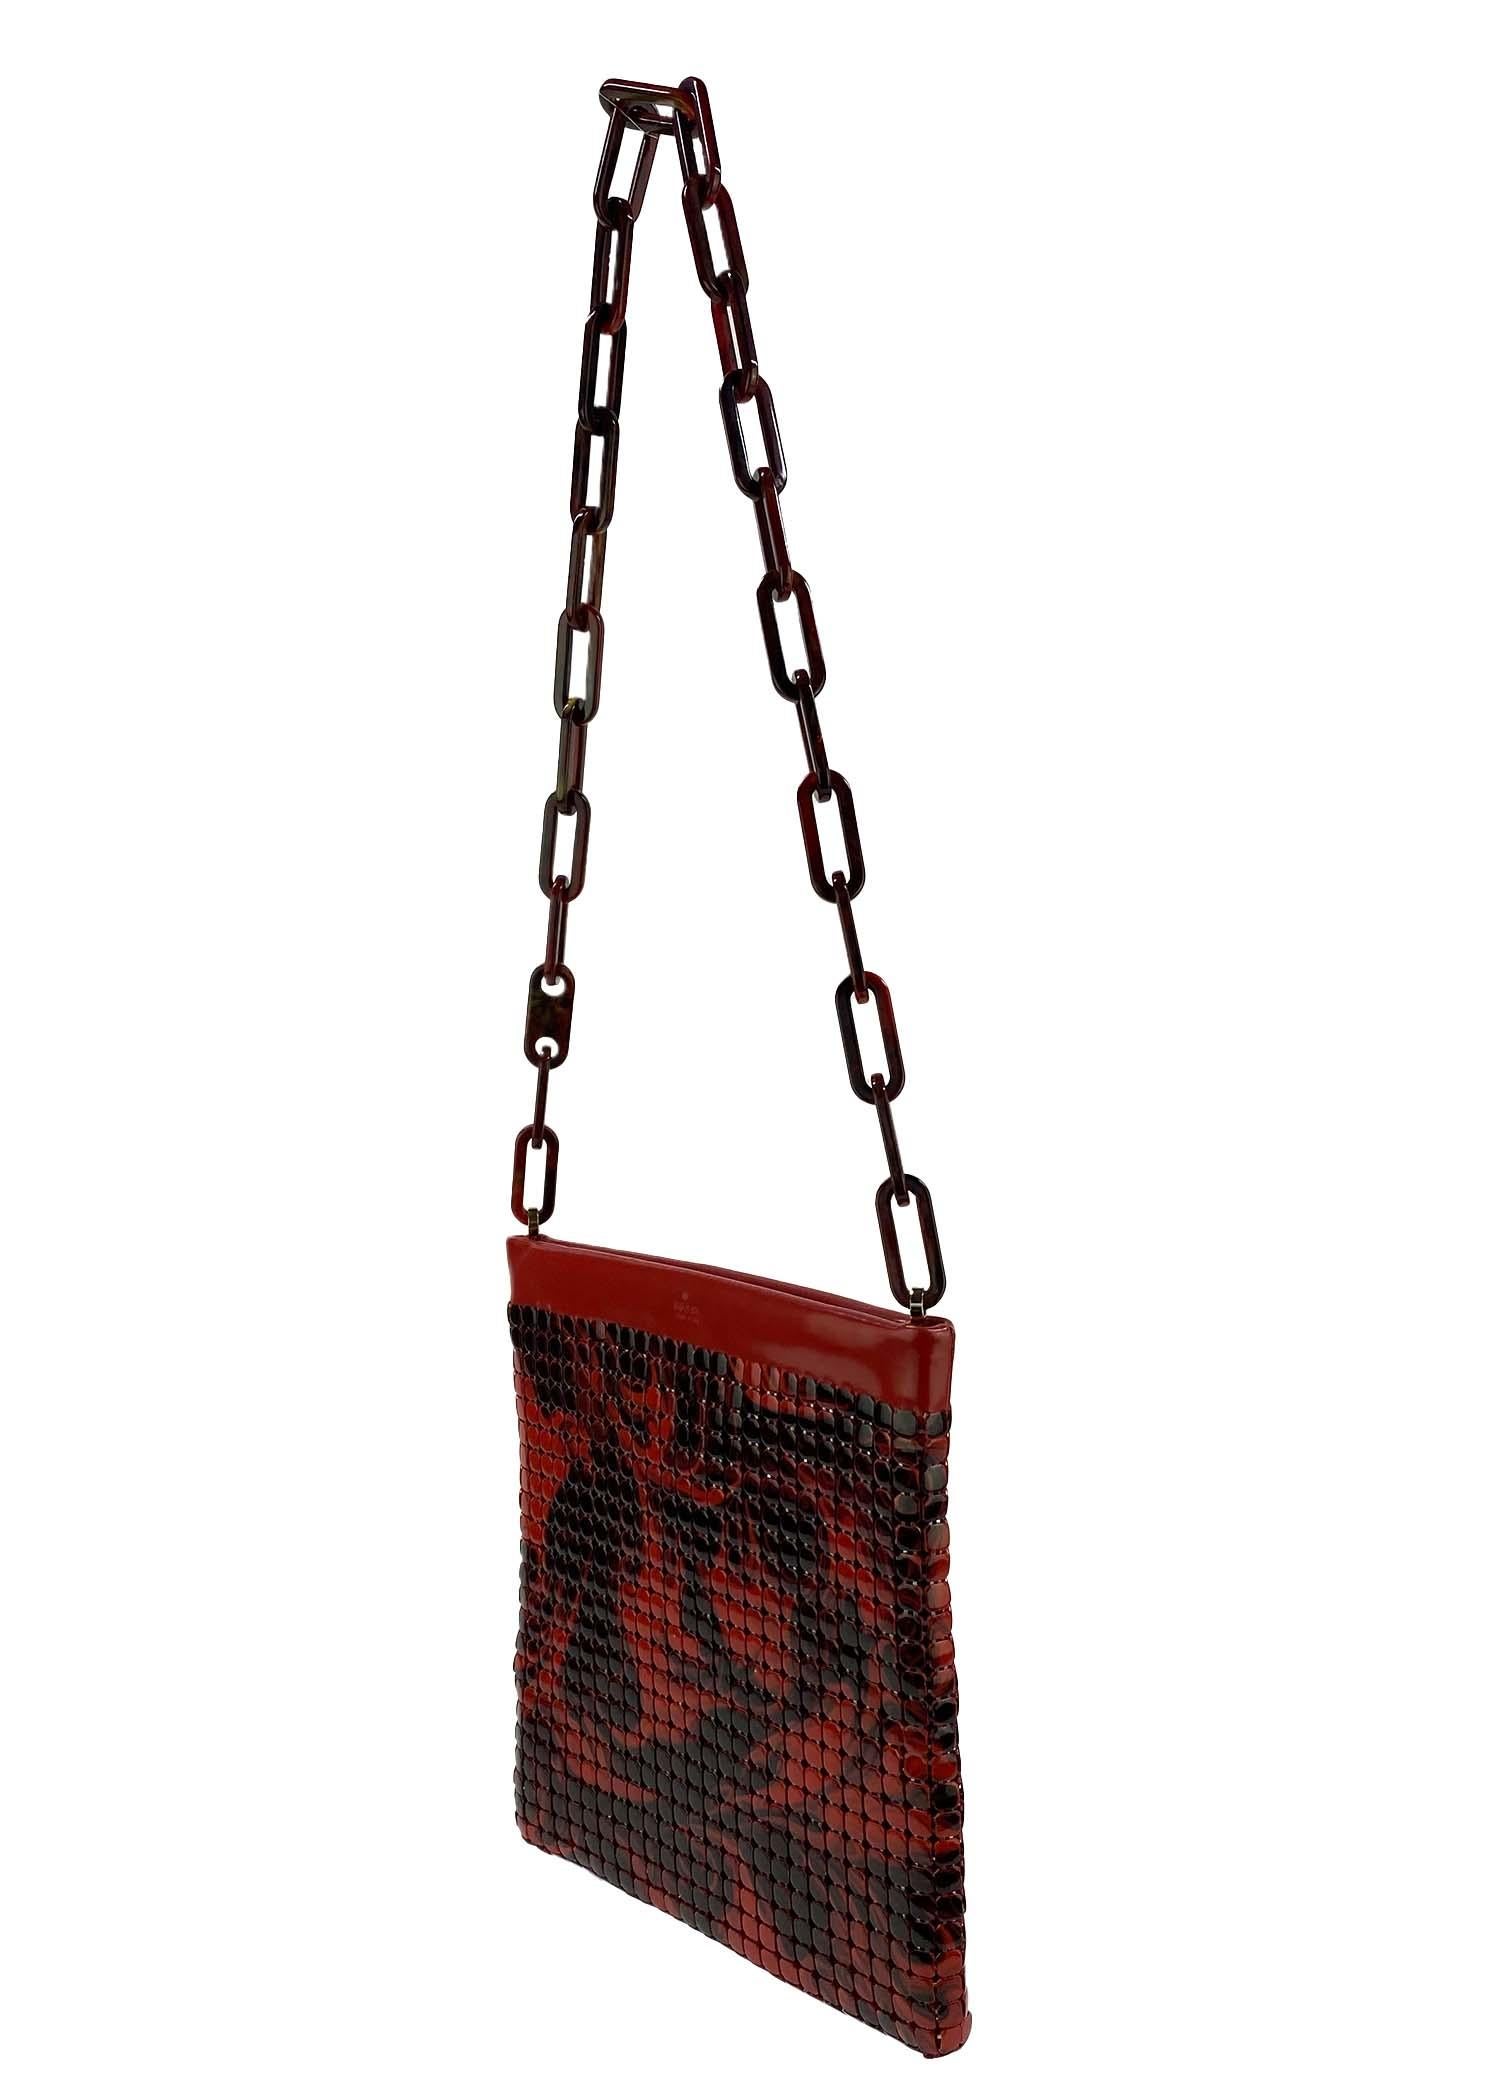 Presenting an ultra-rare, lava print chainmail Gucci bag, designed by Tom Ford. This bag is nearly impossible to find and is a true collector's piece. The red lava design was debuted on the men's S/S 2001 runway and was used heavily in womenswear.